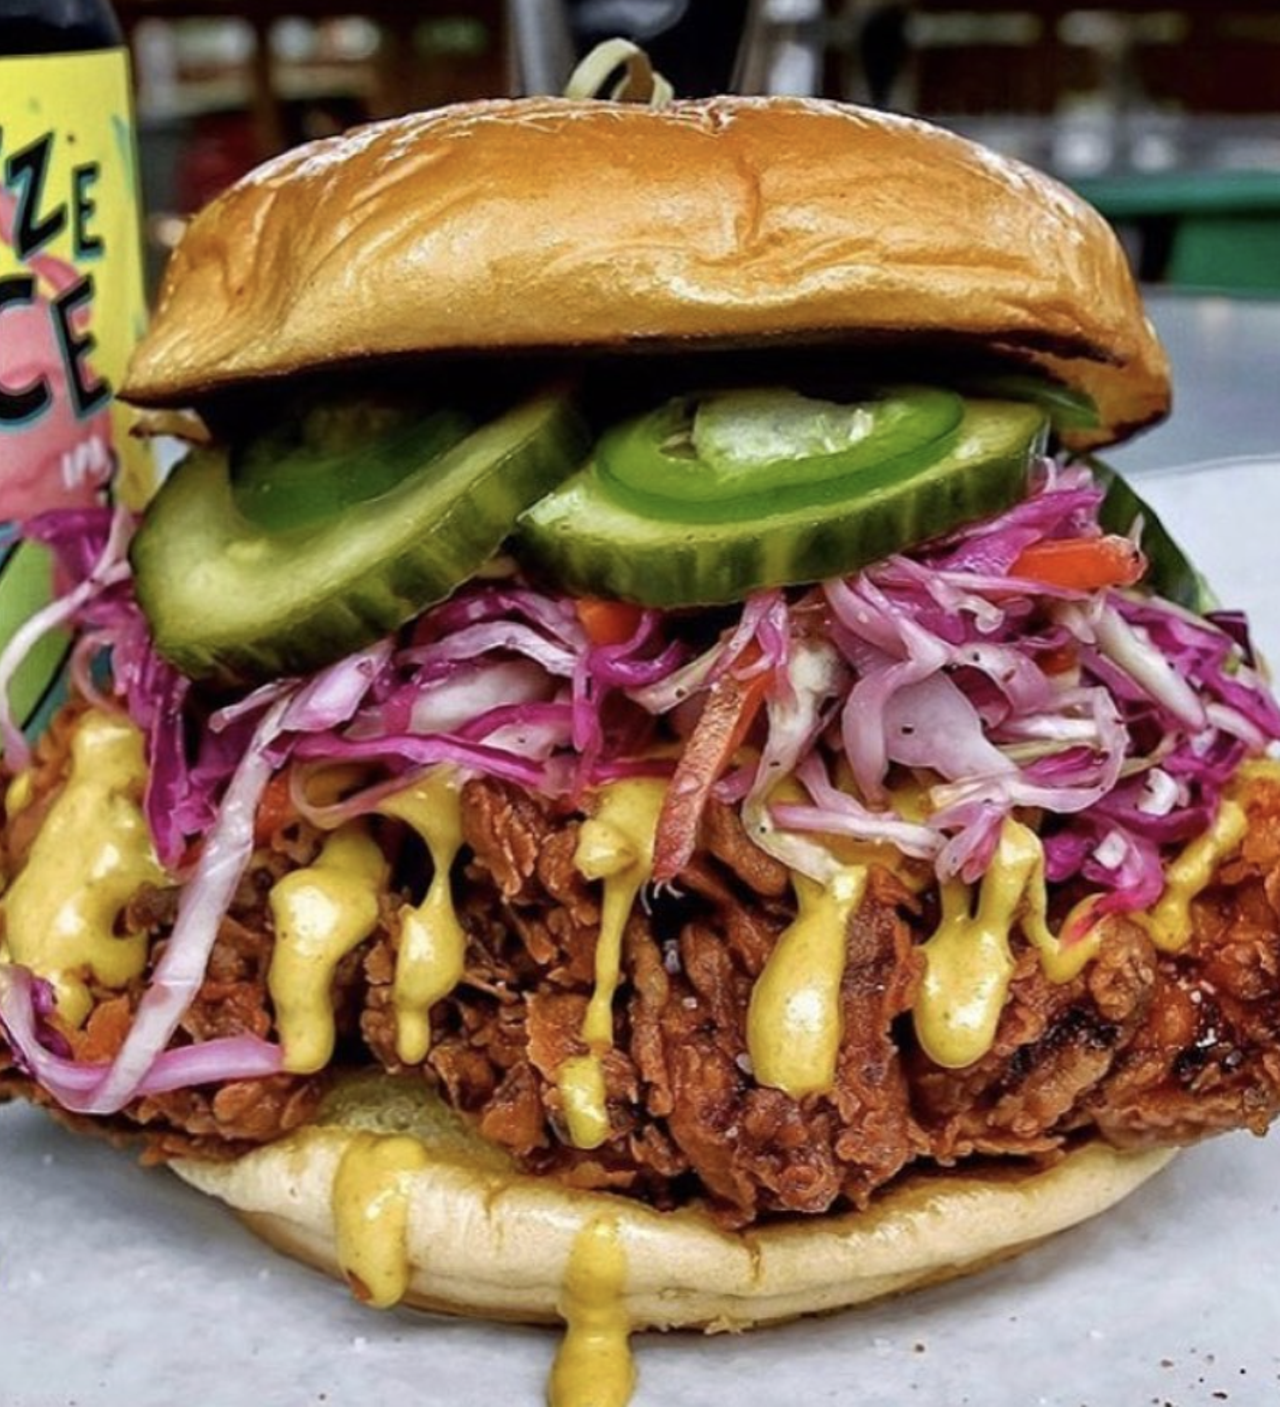 Dignowity Meats
1701 E Houston St, (210) 462-1496,  dignowitymeats.com 
Dignowity Meats top their signature chicken sandwich with vinegar slaw, jalapeños and house pickles. The Crazy Clucker is on a whole other level.  
Photo via Instagram / dignowitymeats